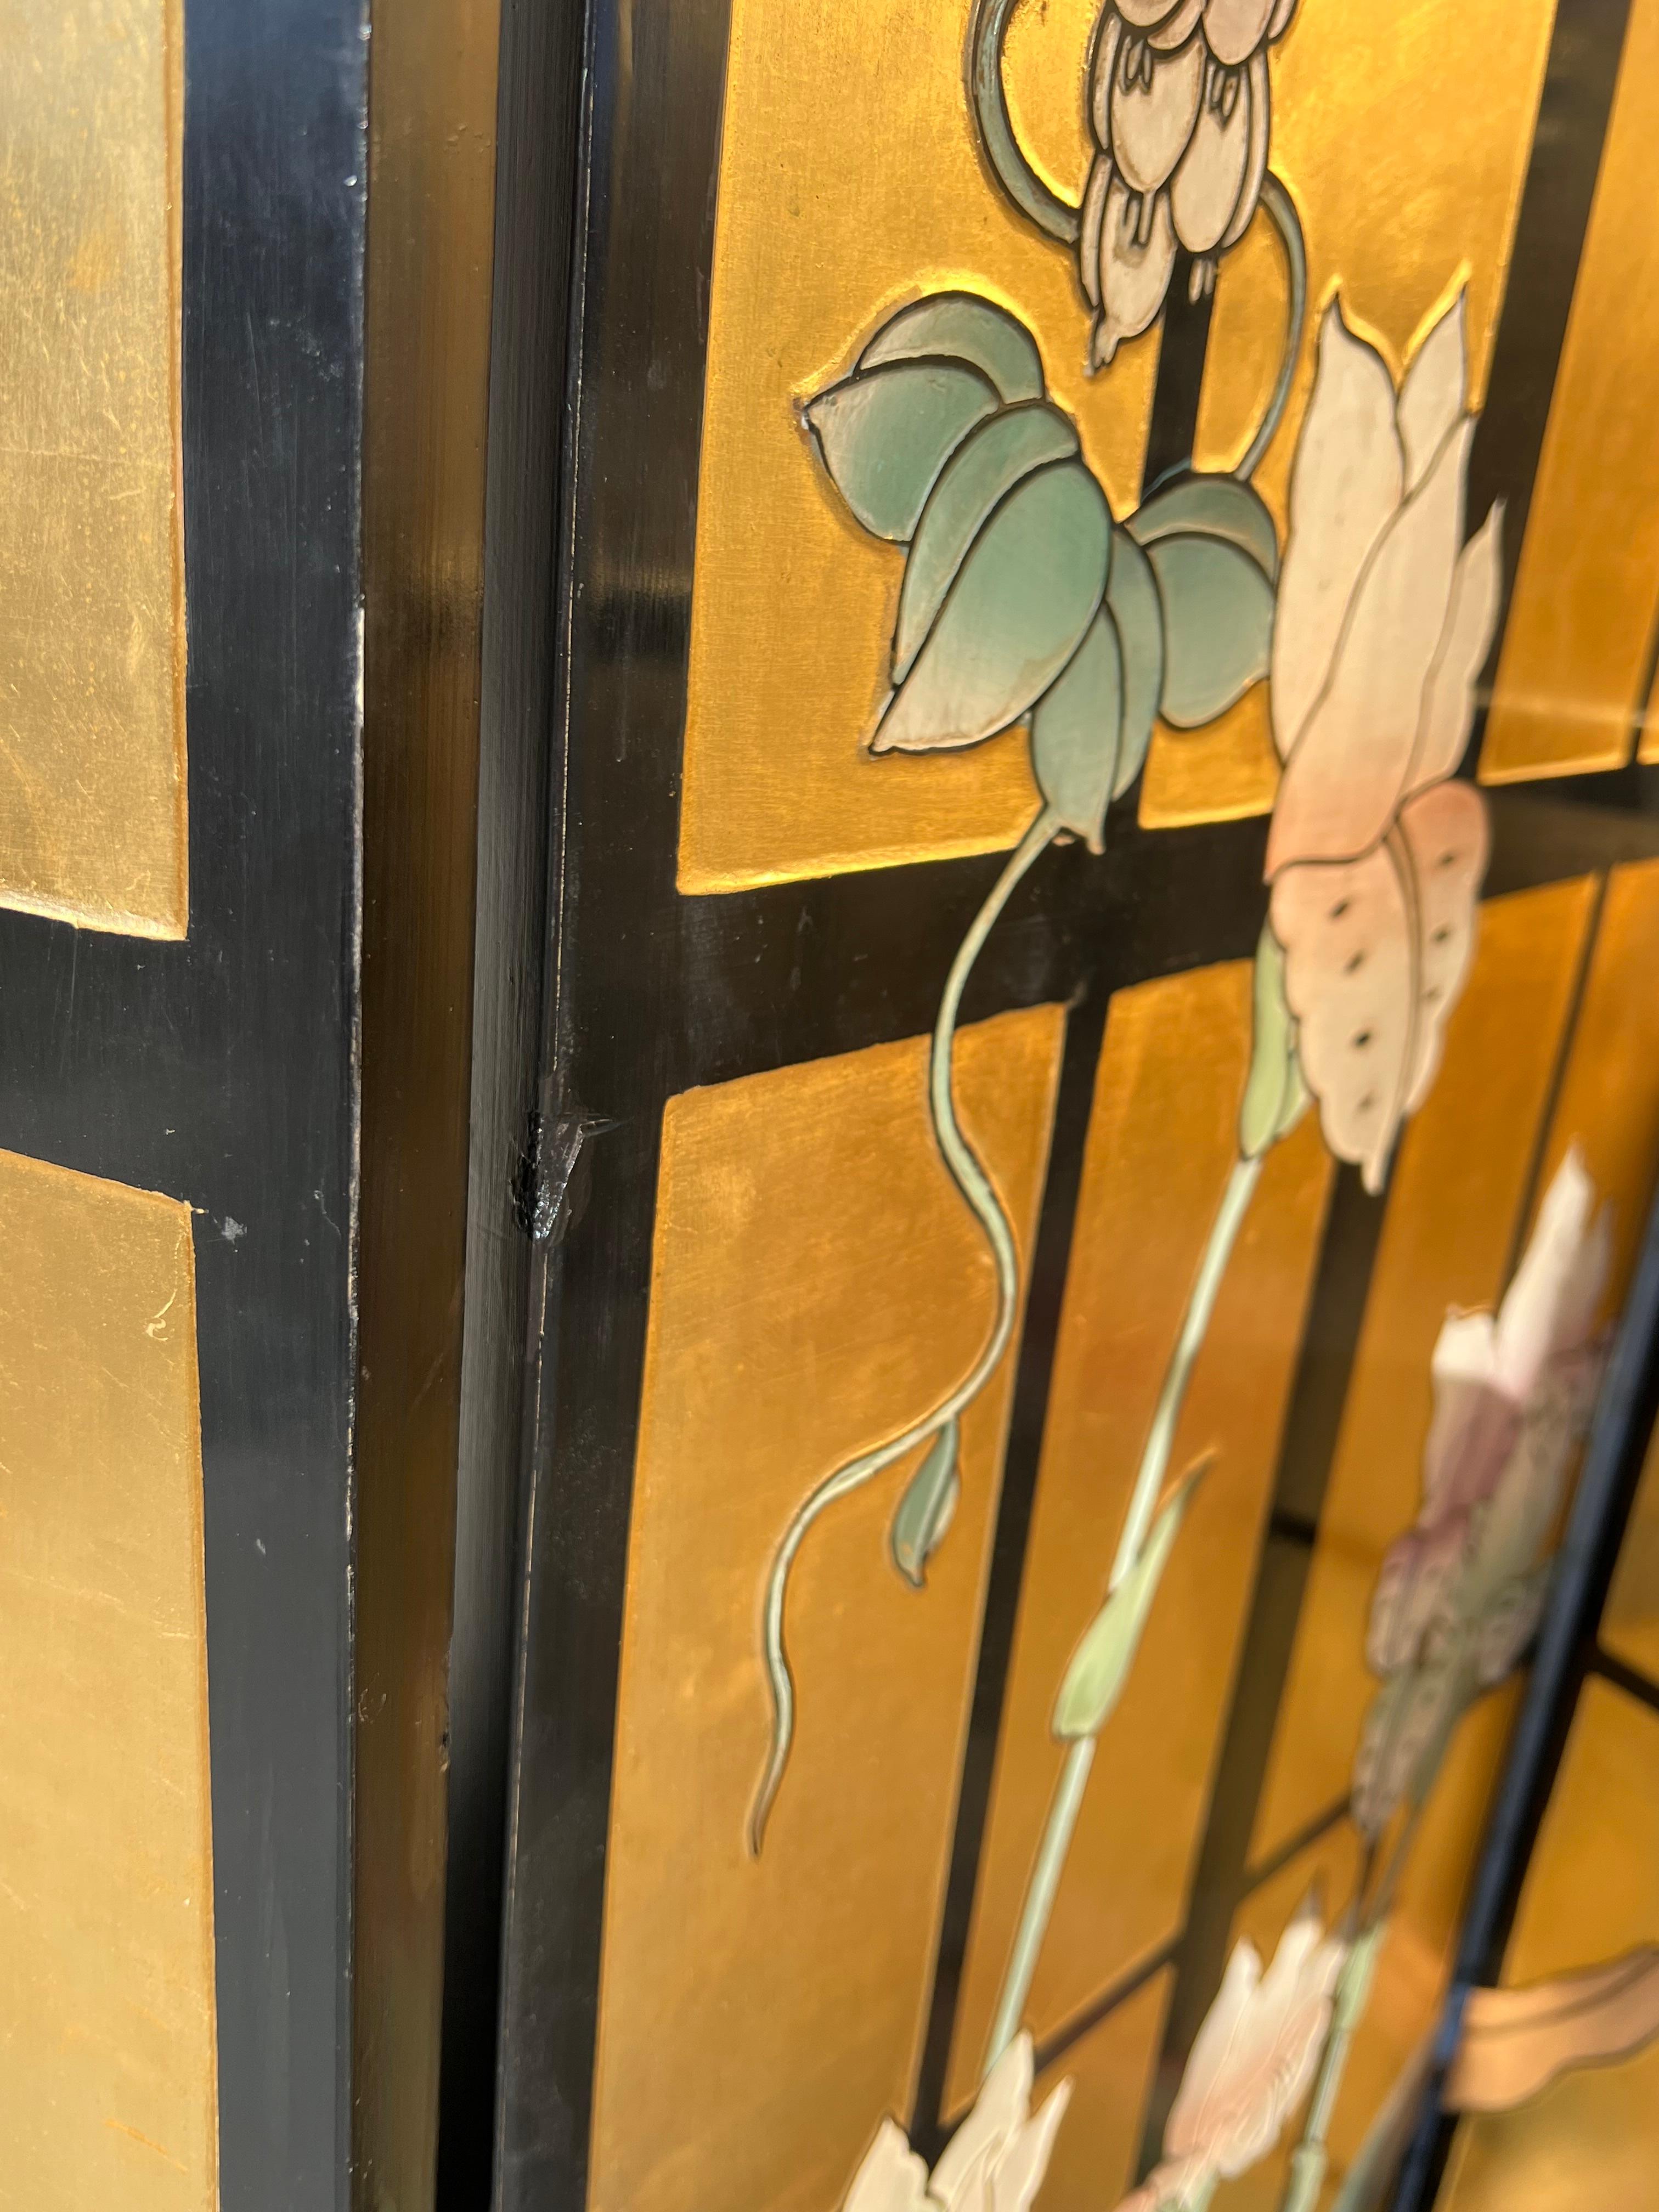 1970 arched Japanese room divider, Made in Paris.

This one of a kind arched room divider was found in a mansion whose owner bought it from France in 1970s.